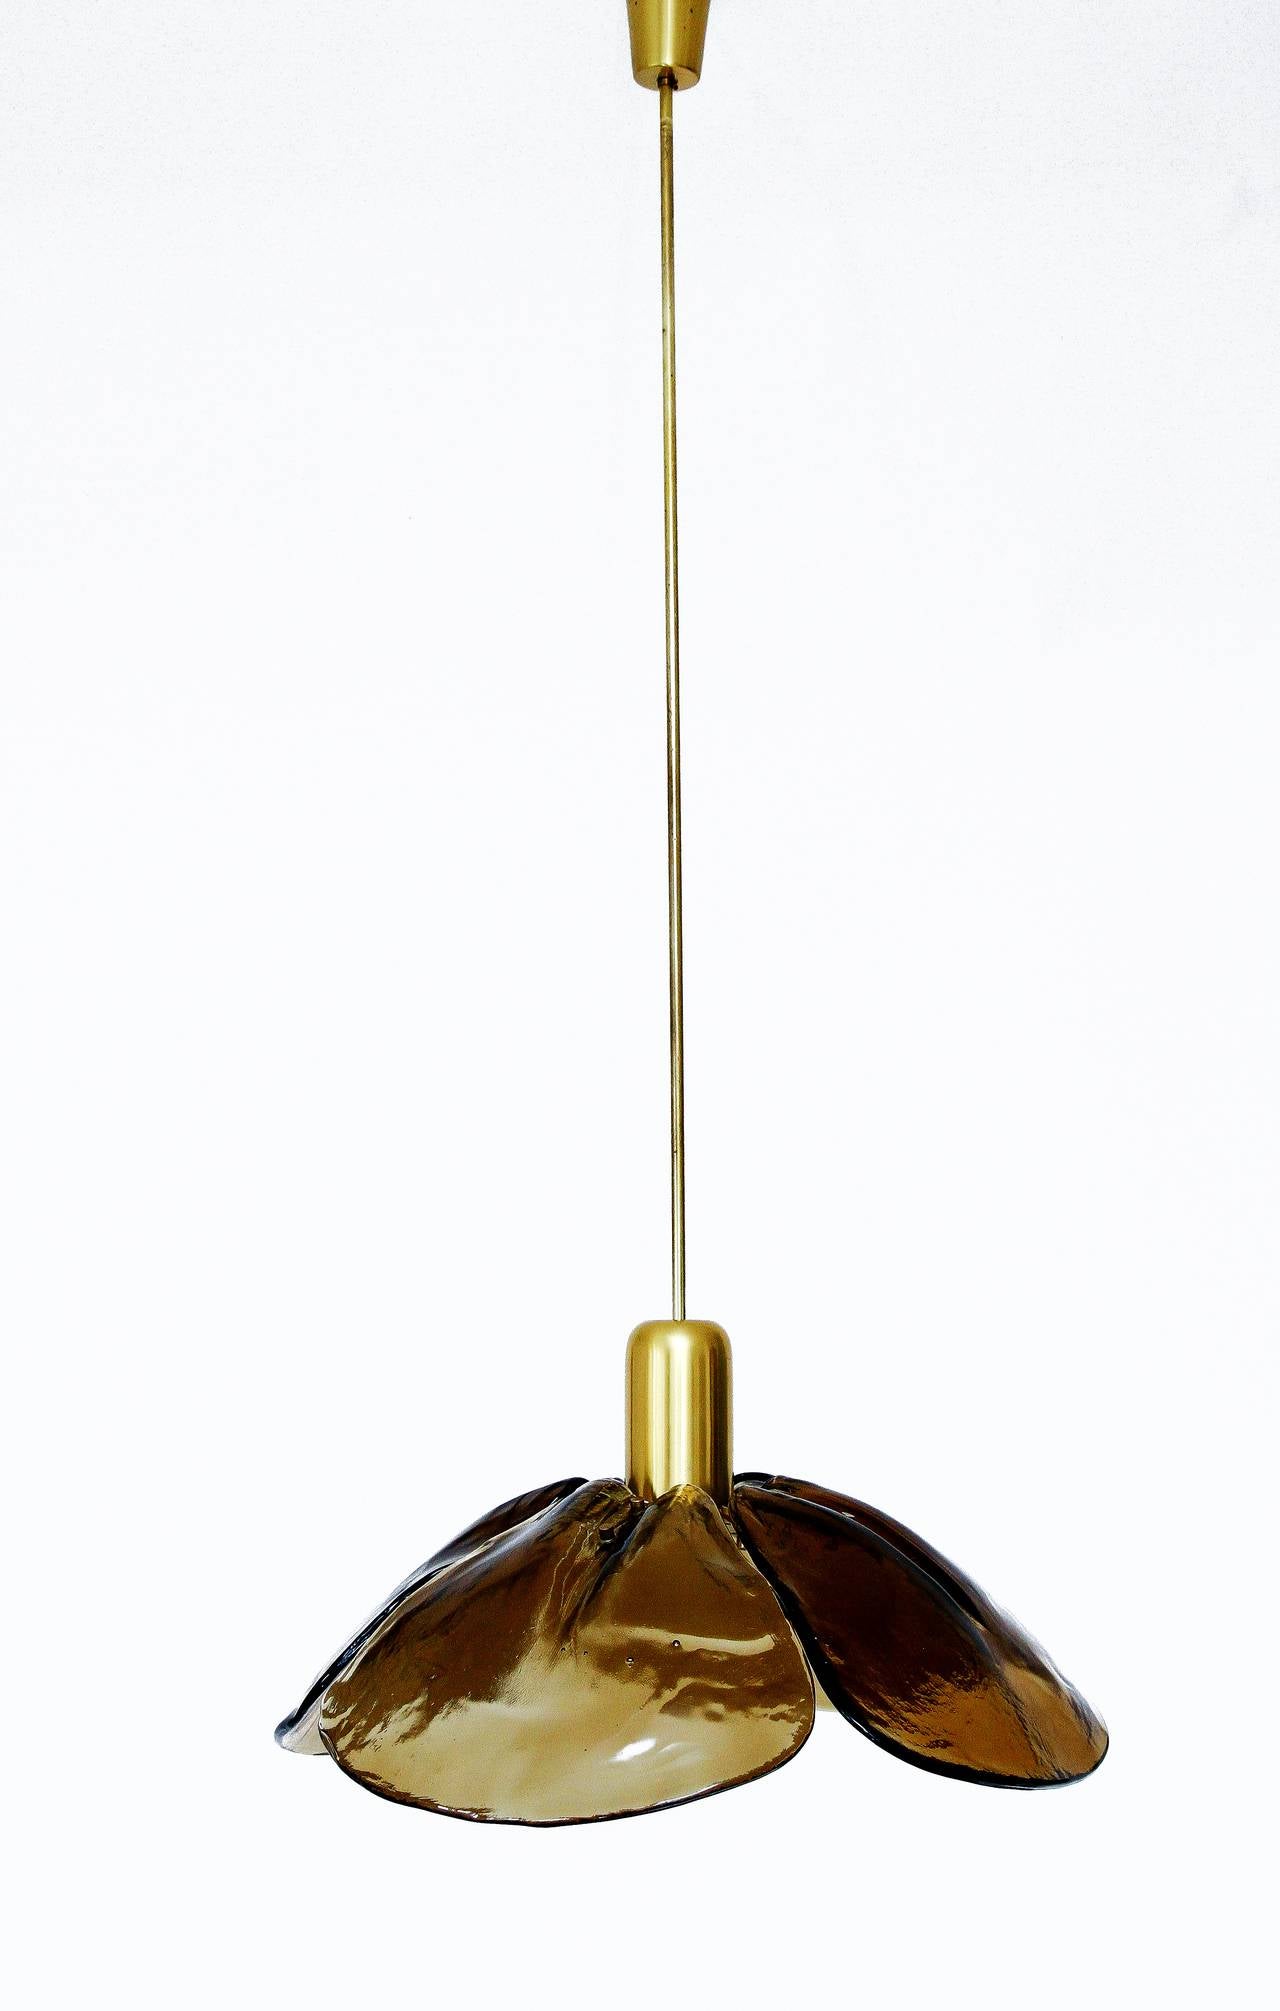 A large pendant light in the form of a flower by Kalmar Franken KG manufactured in midcentury, circa 1970. Four smoke or amber tone Murano glasses are mounted on a brass fixture.
The light has one socket for a standard screw base bulb up to max.